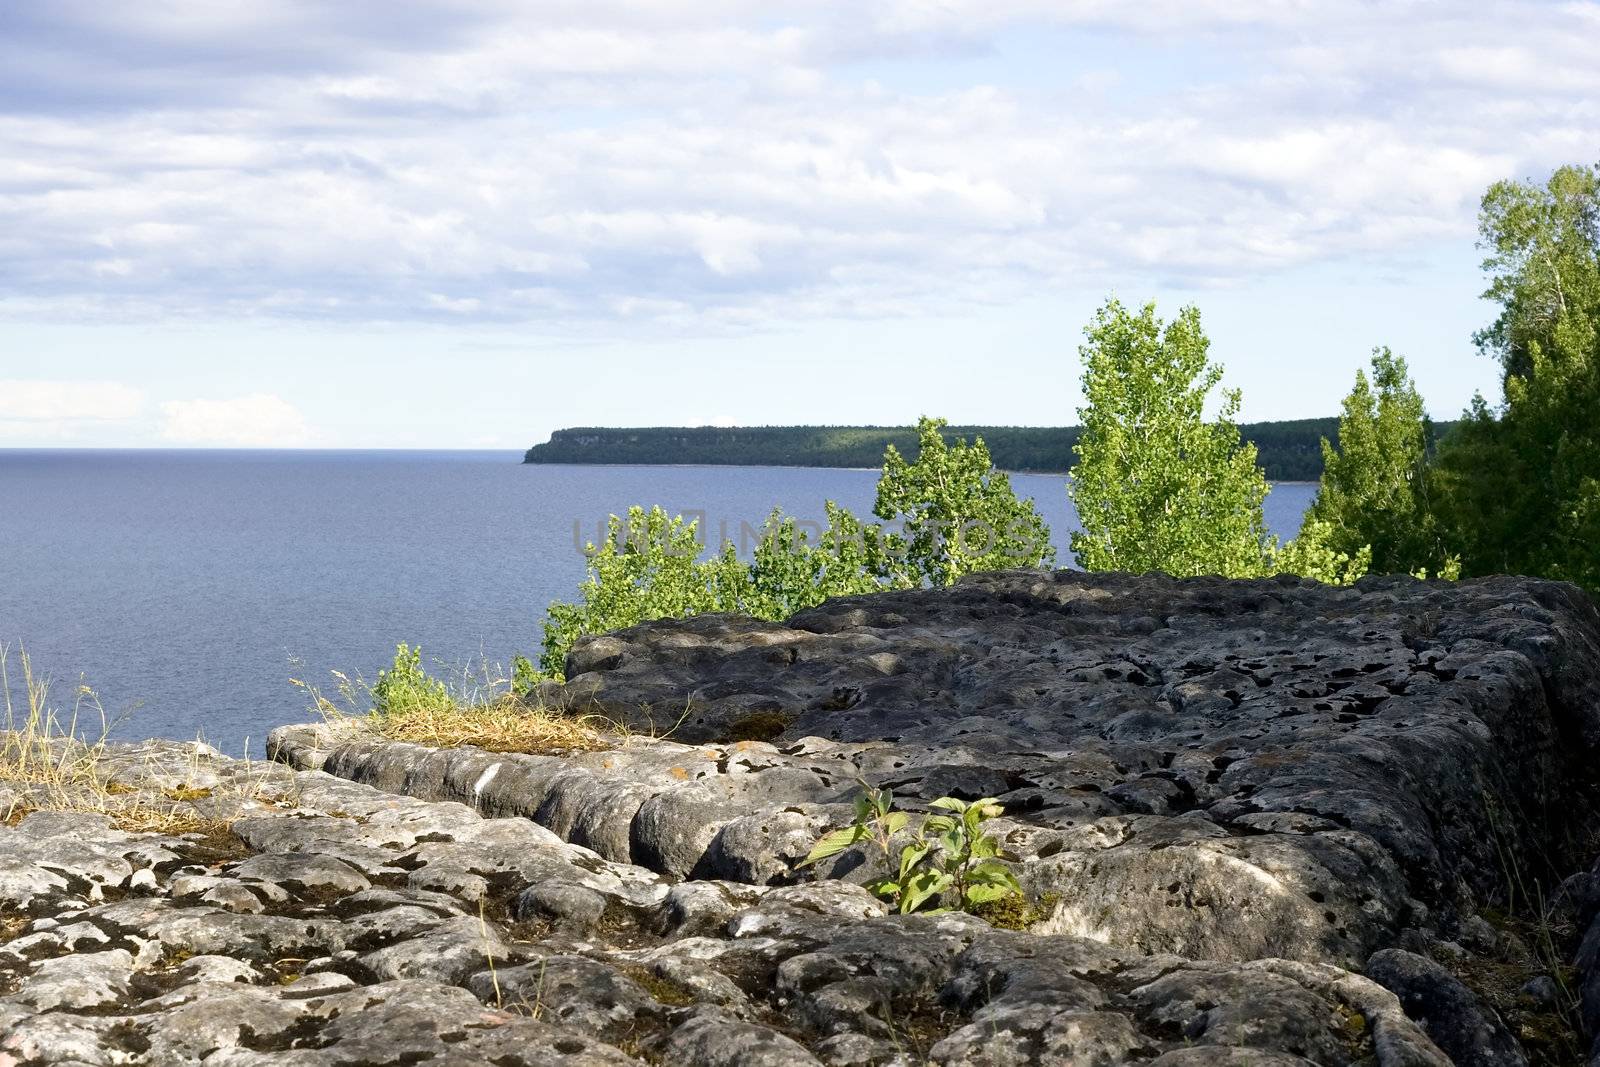 Porous rock and some foliage in the foreground, with Georgian Bay in the background.